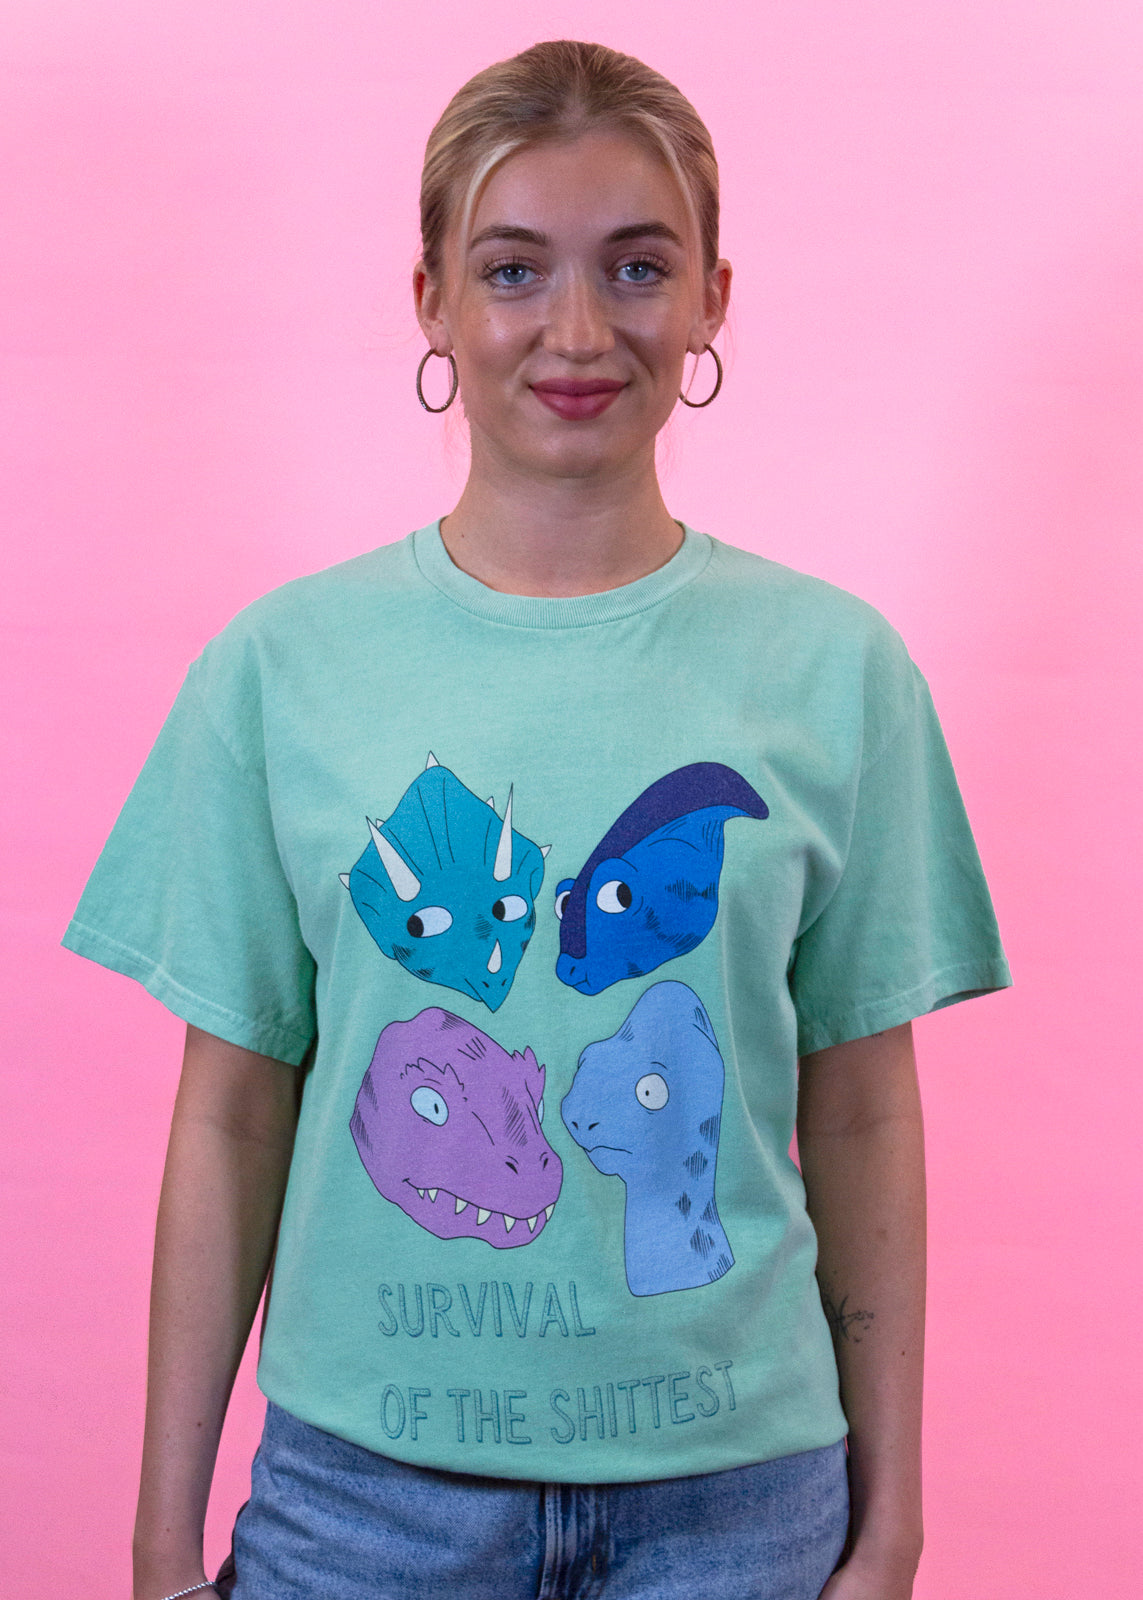 Home of Rainbows - Survival Of The Shi*test Dinosaur Tee